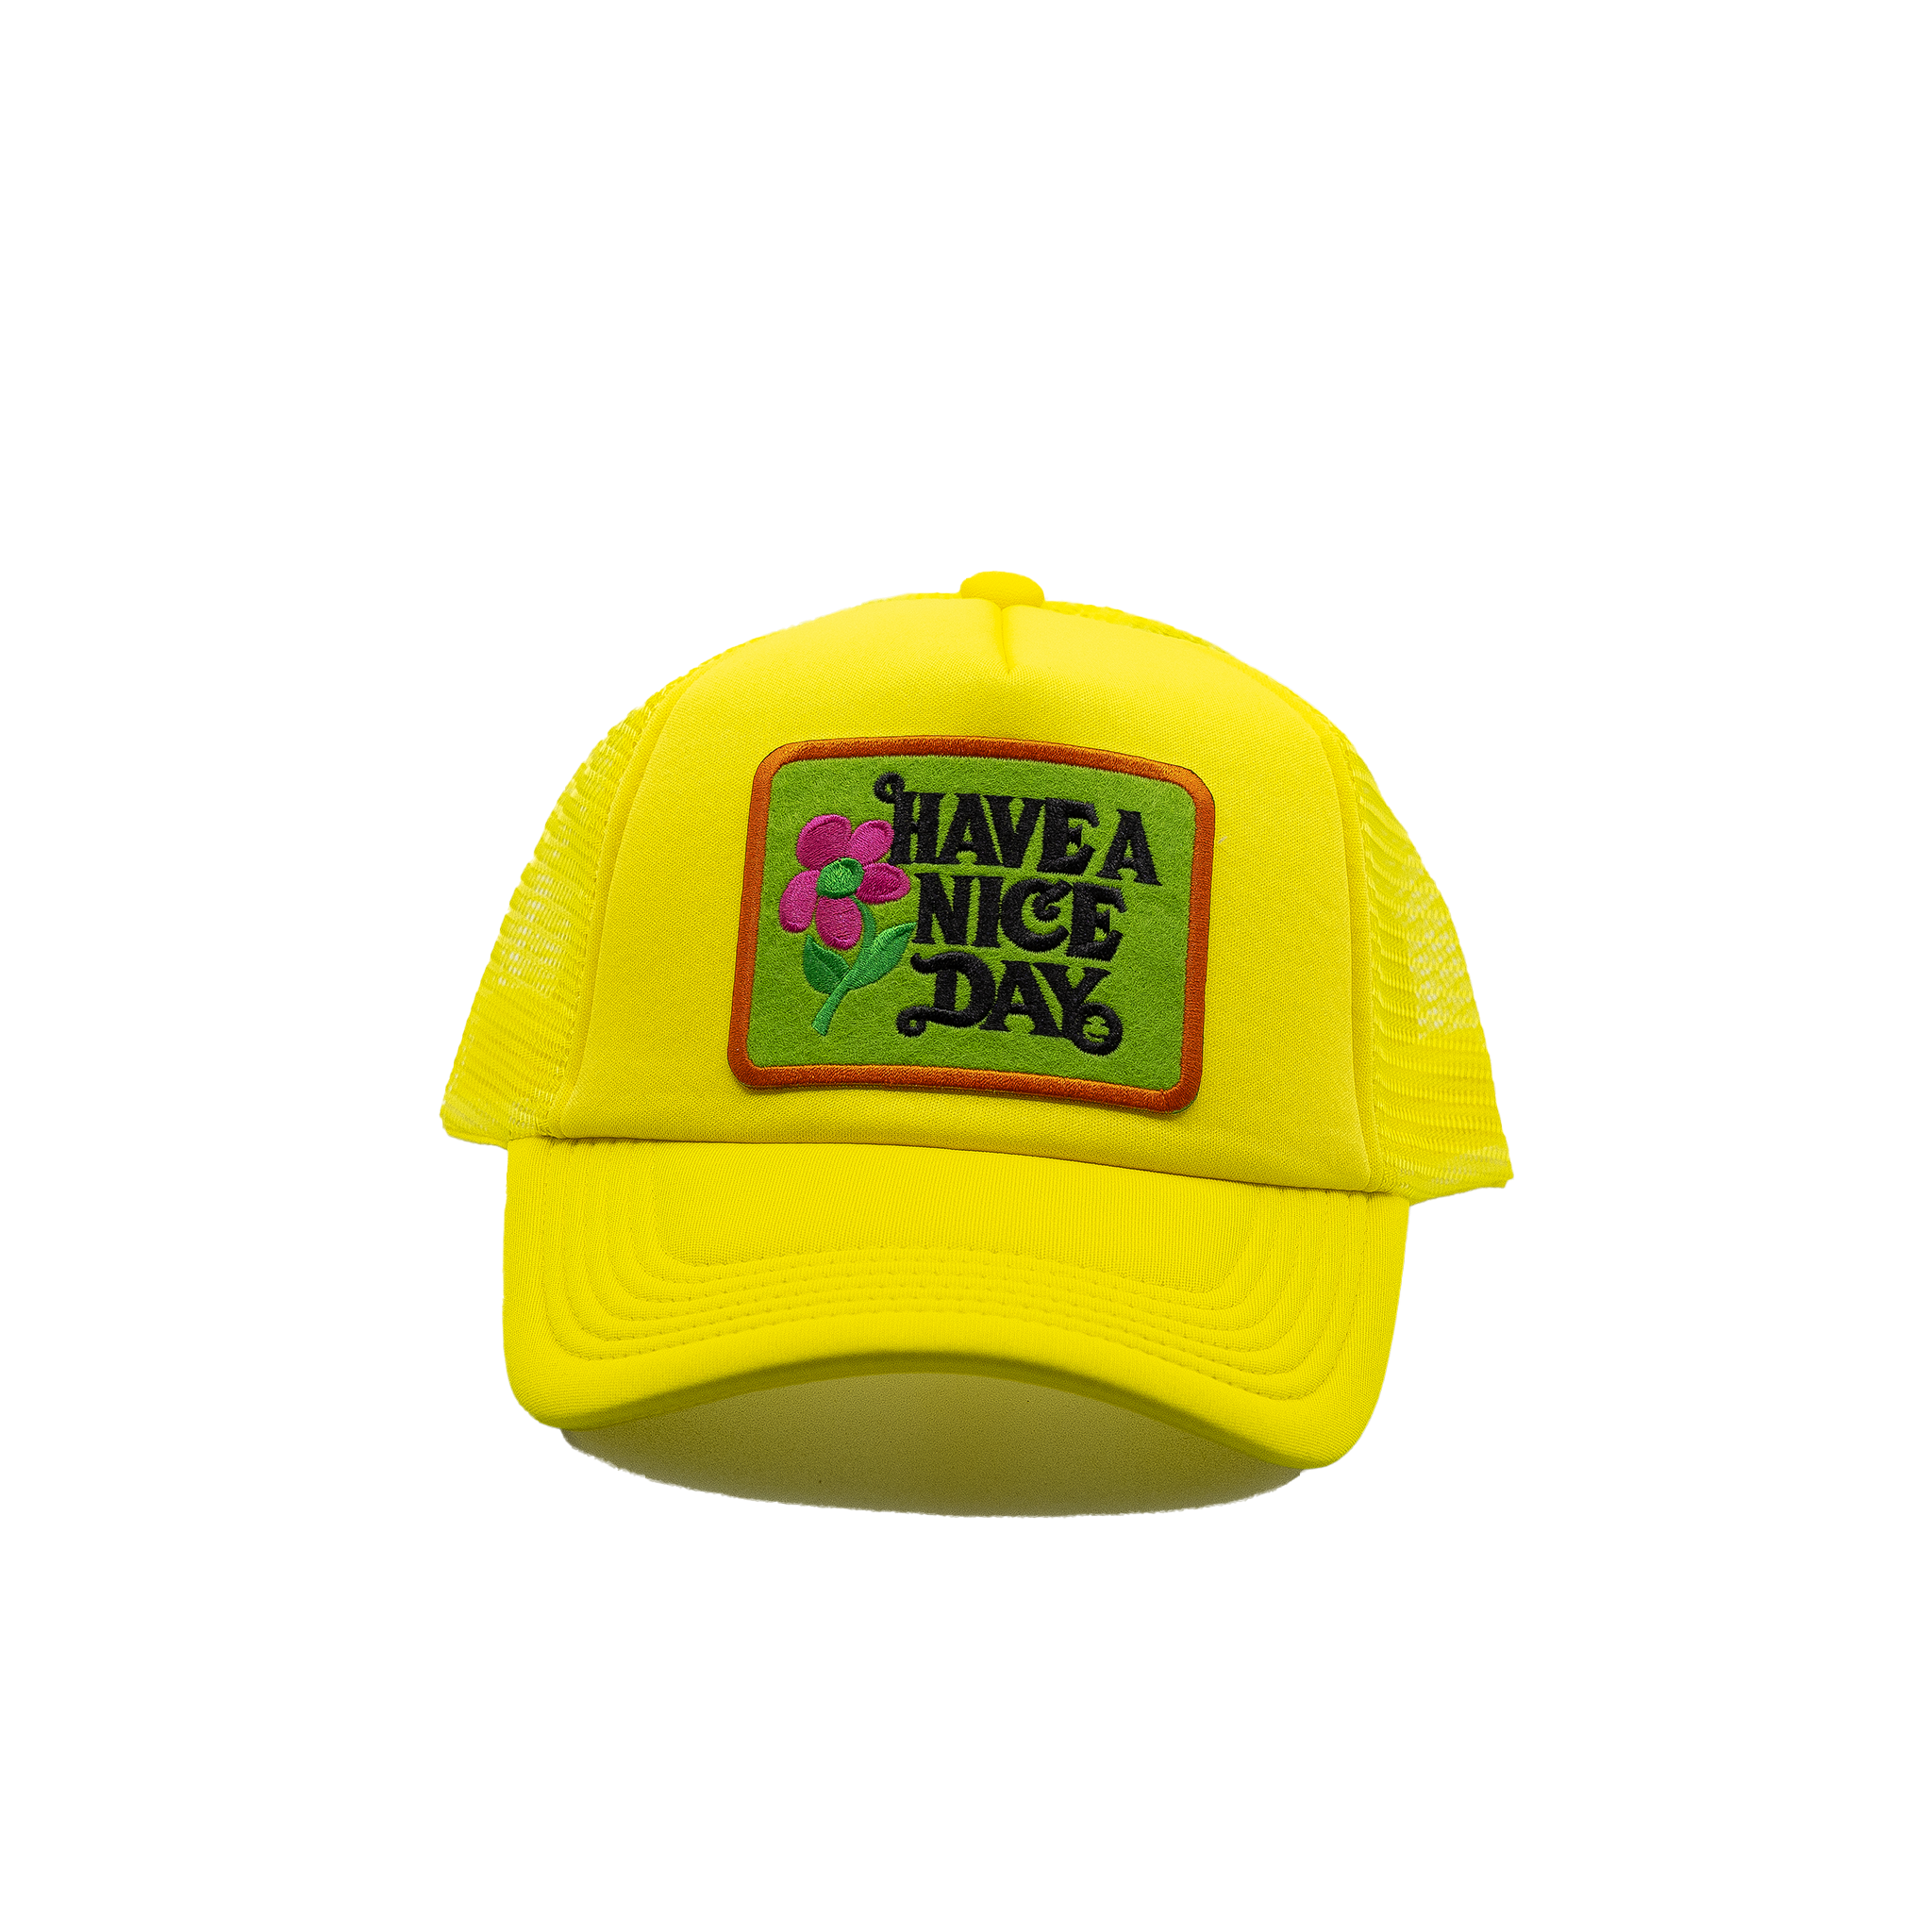 Have a Nice Day Yellow All Styles Trucker Hat